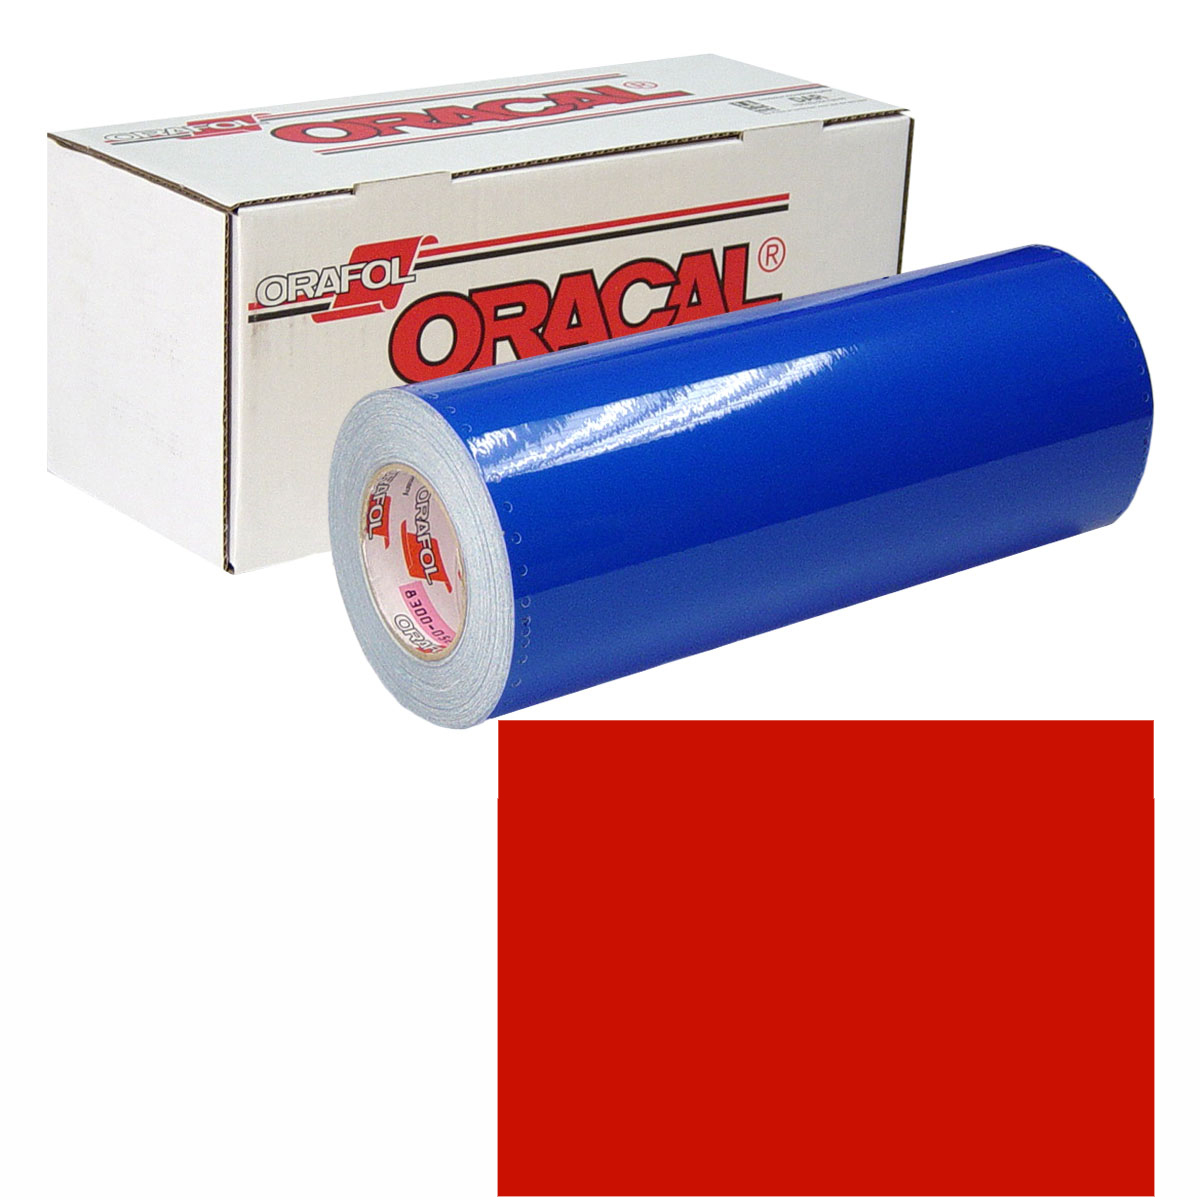 ORACAL 631 30in X 10yd 032 Light Red